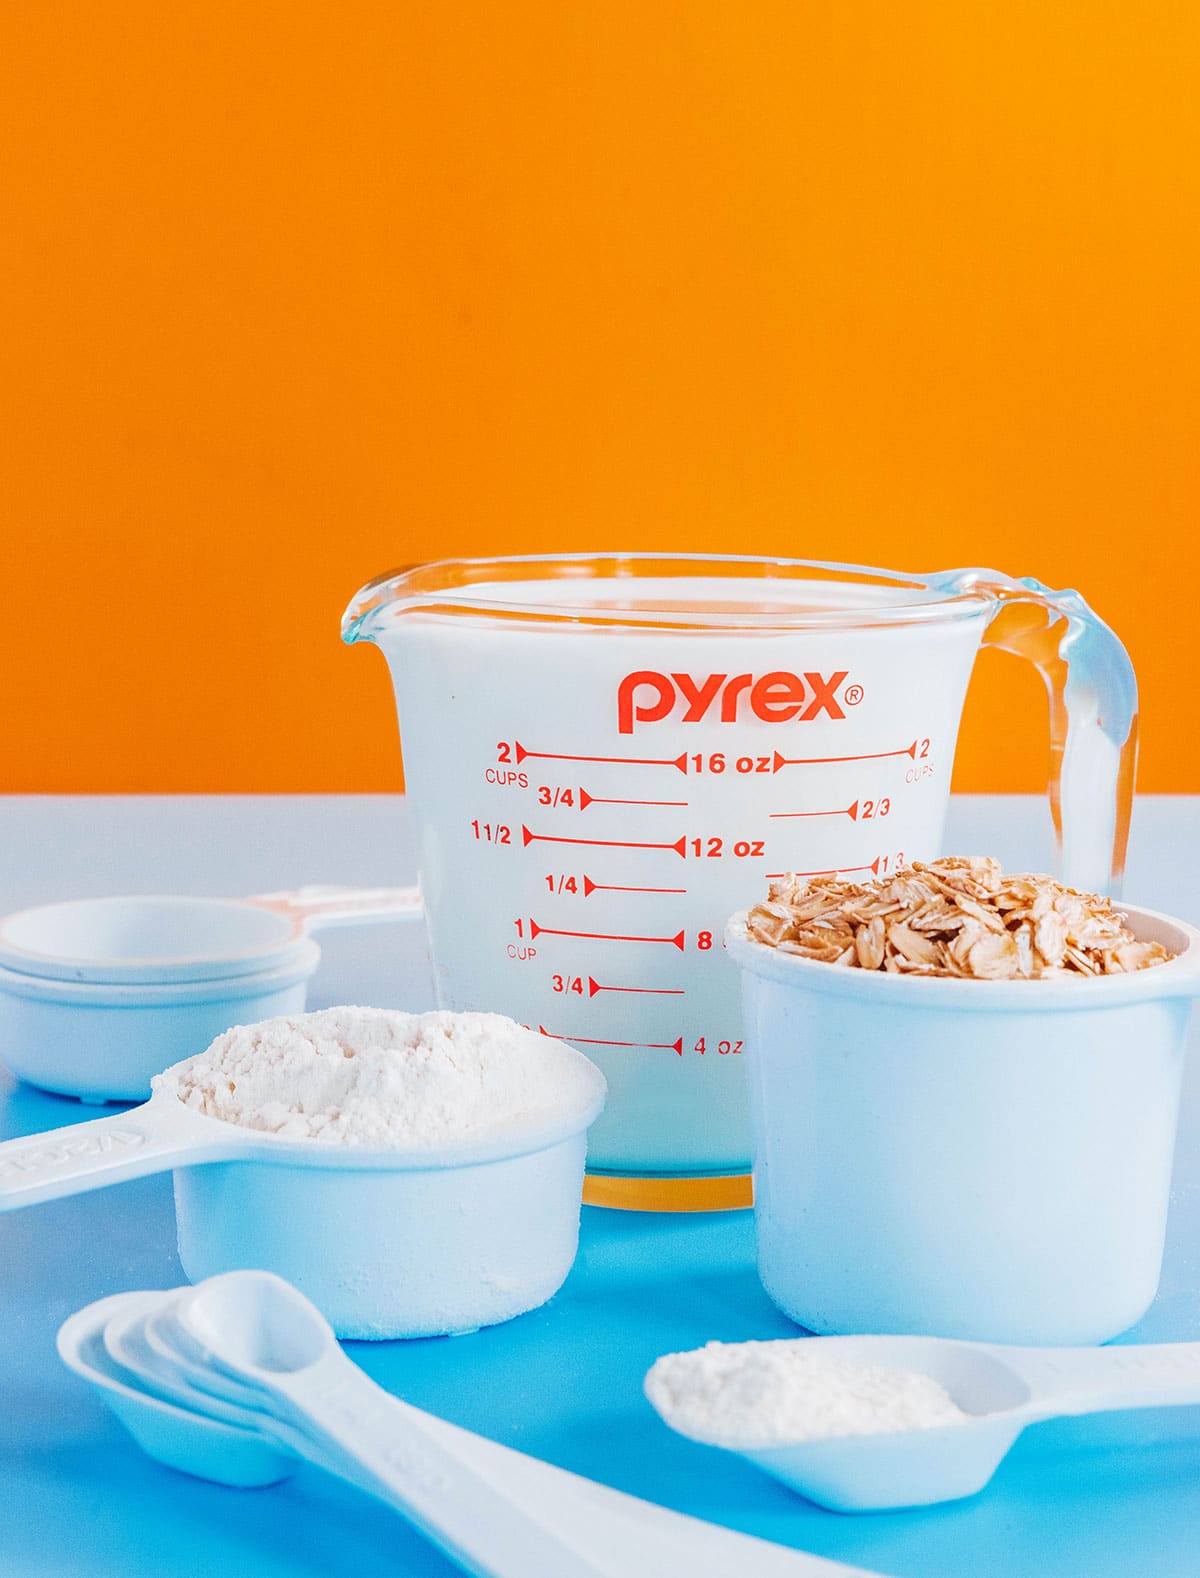 A picture of various measurement utensils, including a glass Pyrex liquid measurement cup and cups full of oats and flour.